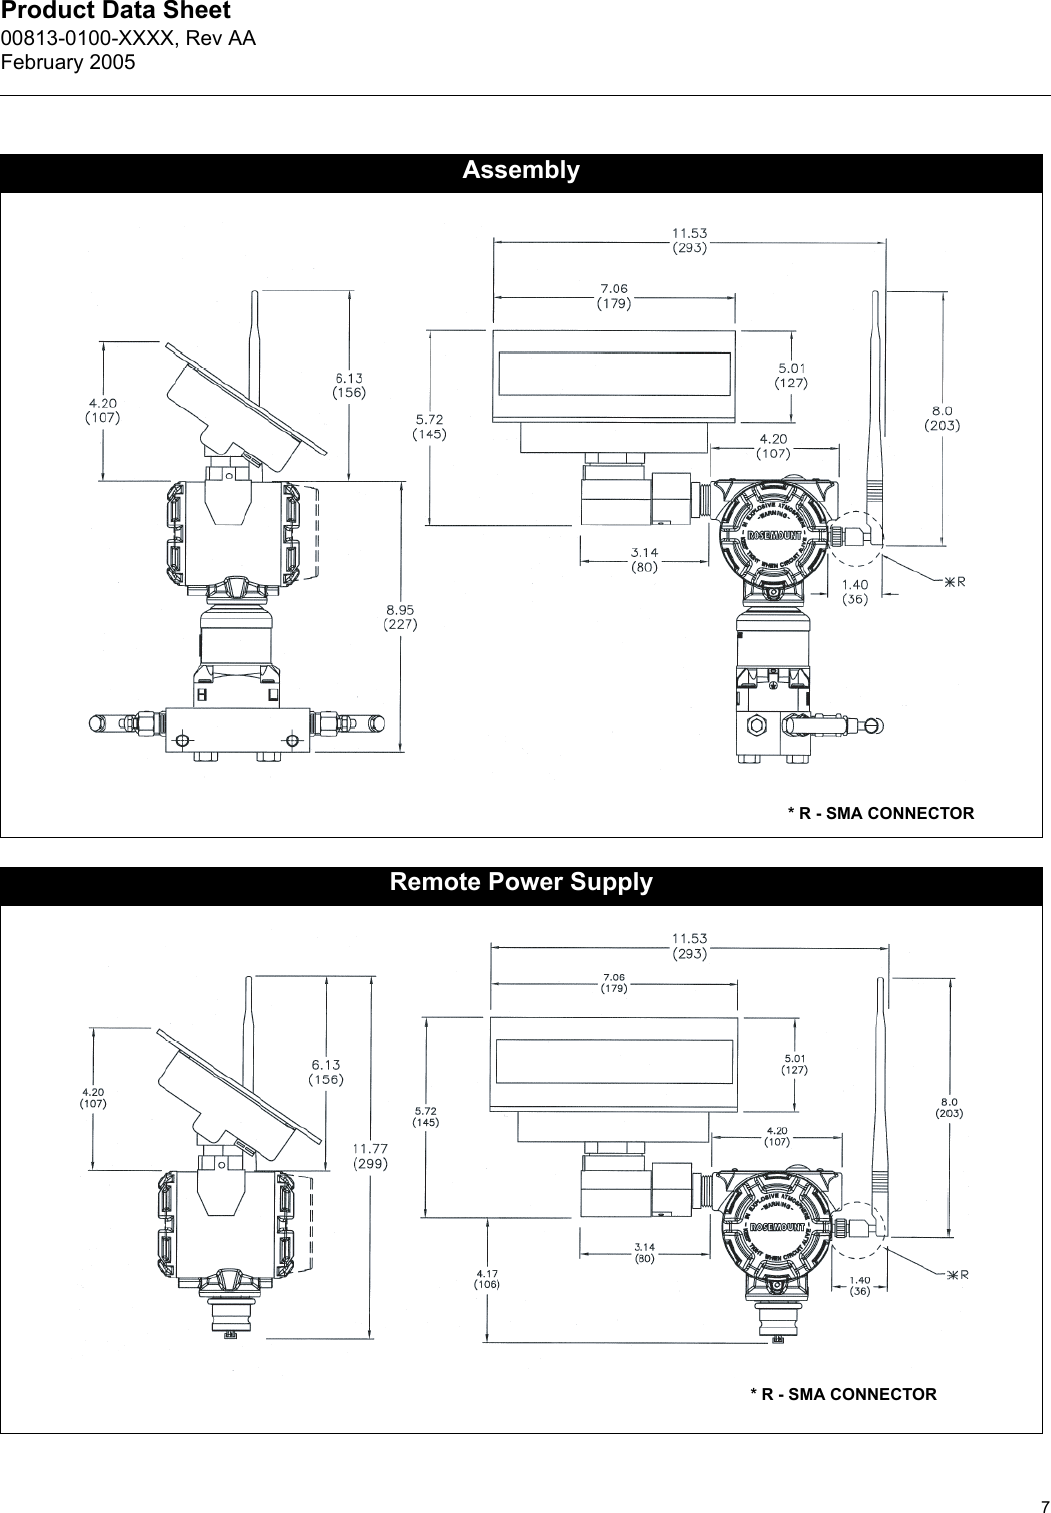 Product Data Sheet00813-0100-XXXX, Rev AAFebruary 20057AssemblyRemote Power Supply* R - SMA CONNECTOR* R - SMA CONNECTOR